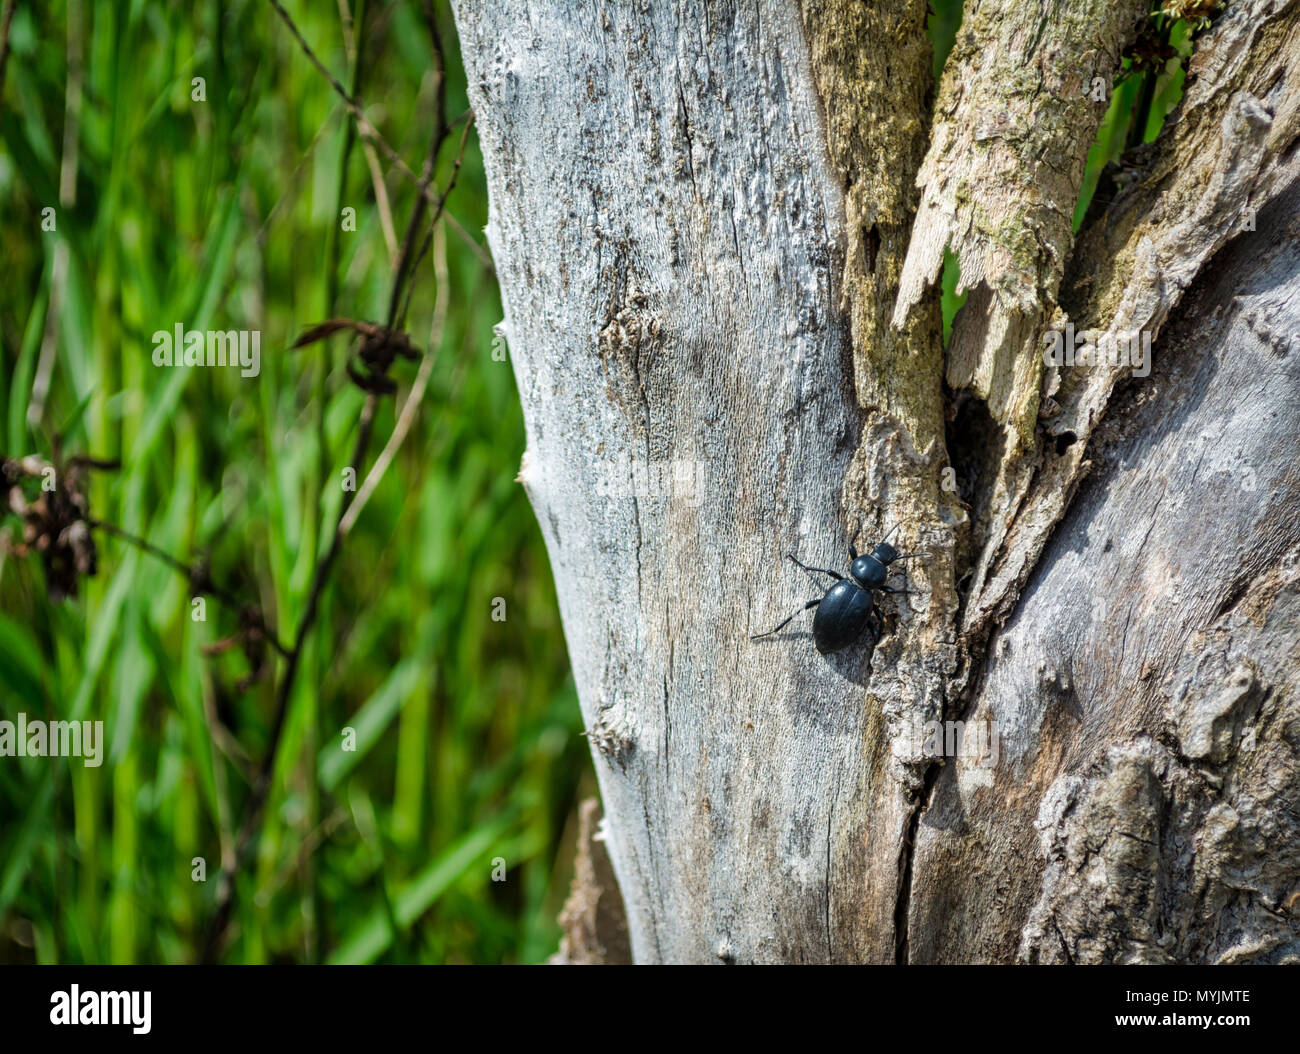 Closeup of black beetle on a tree in a meadow Stock Photo